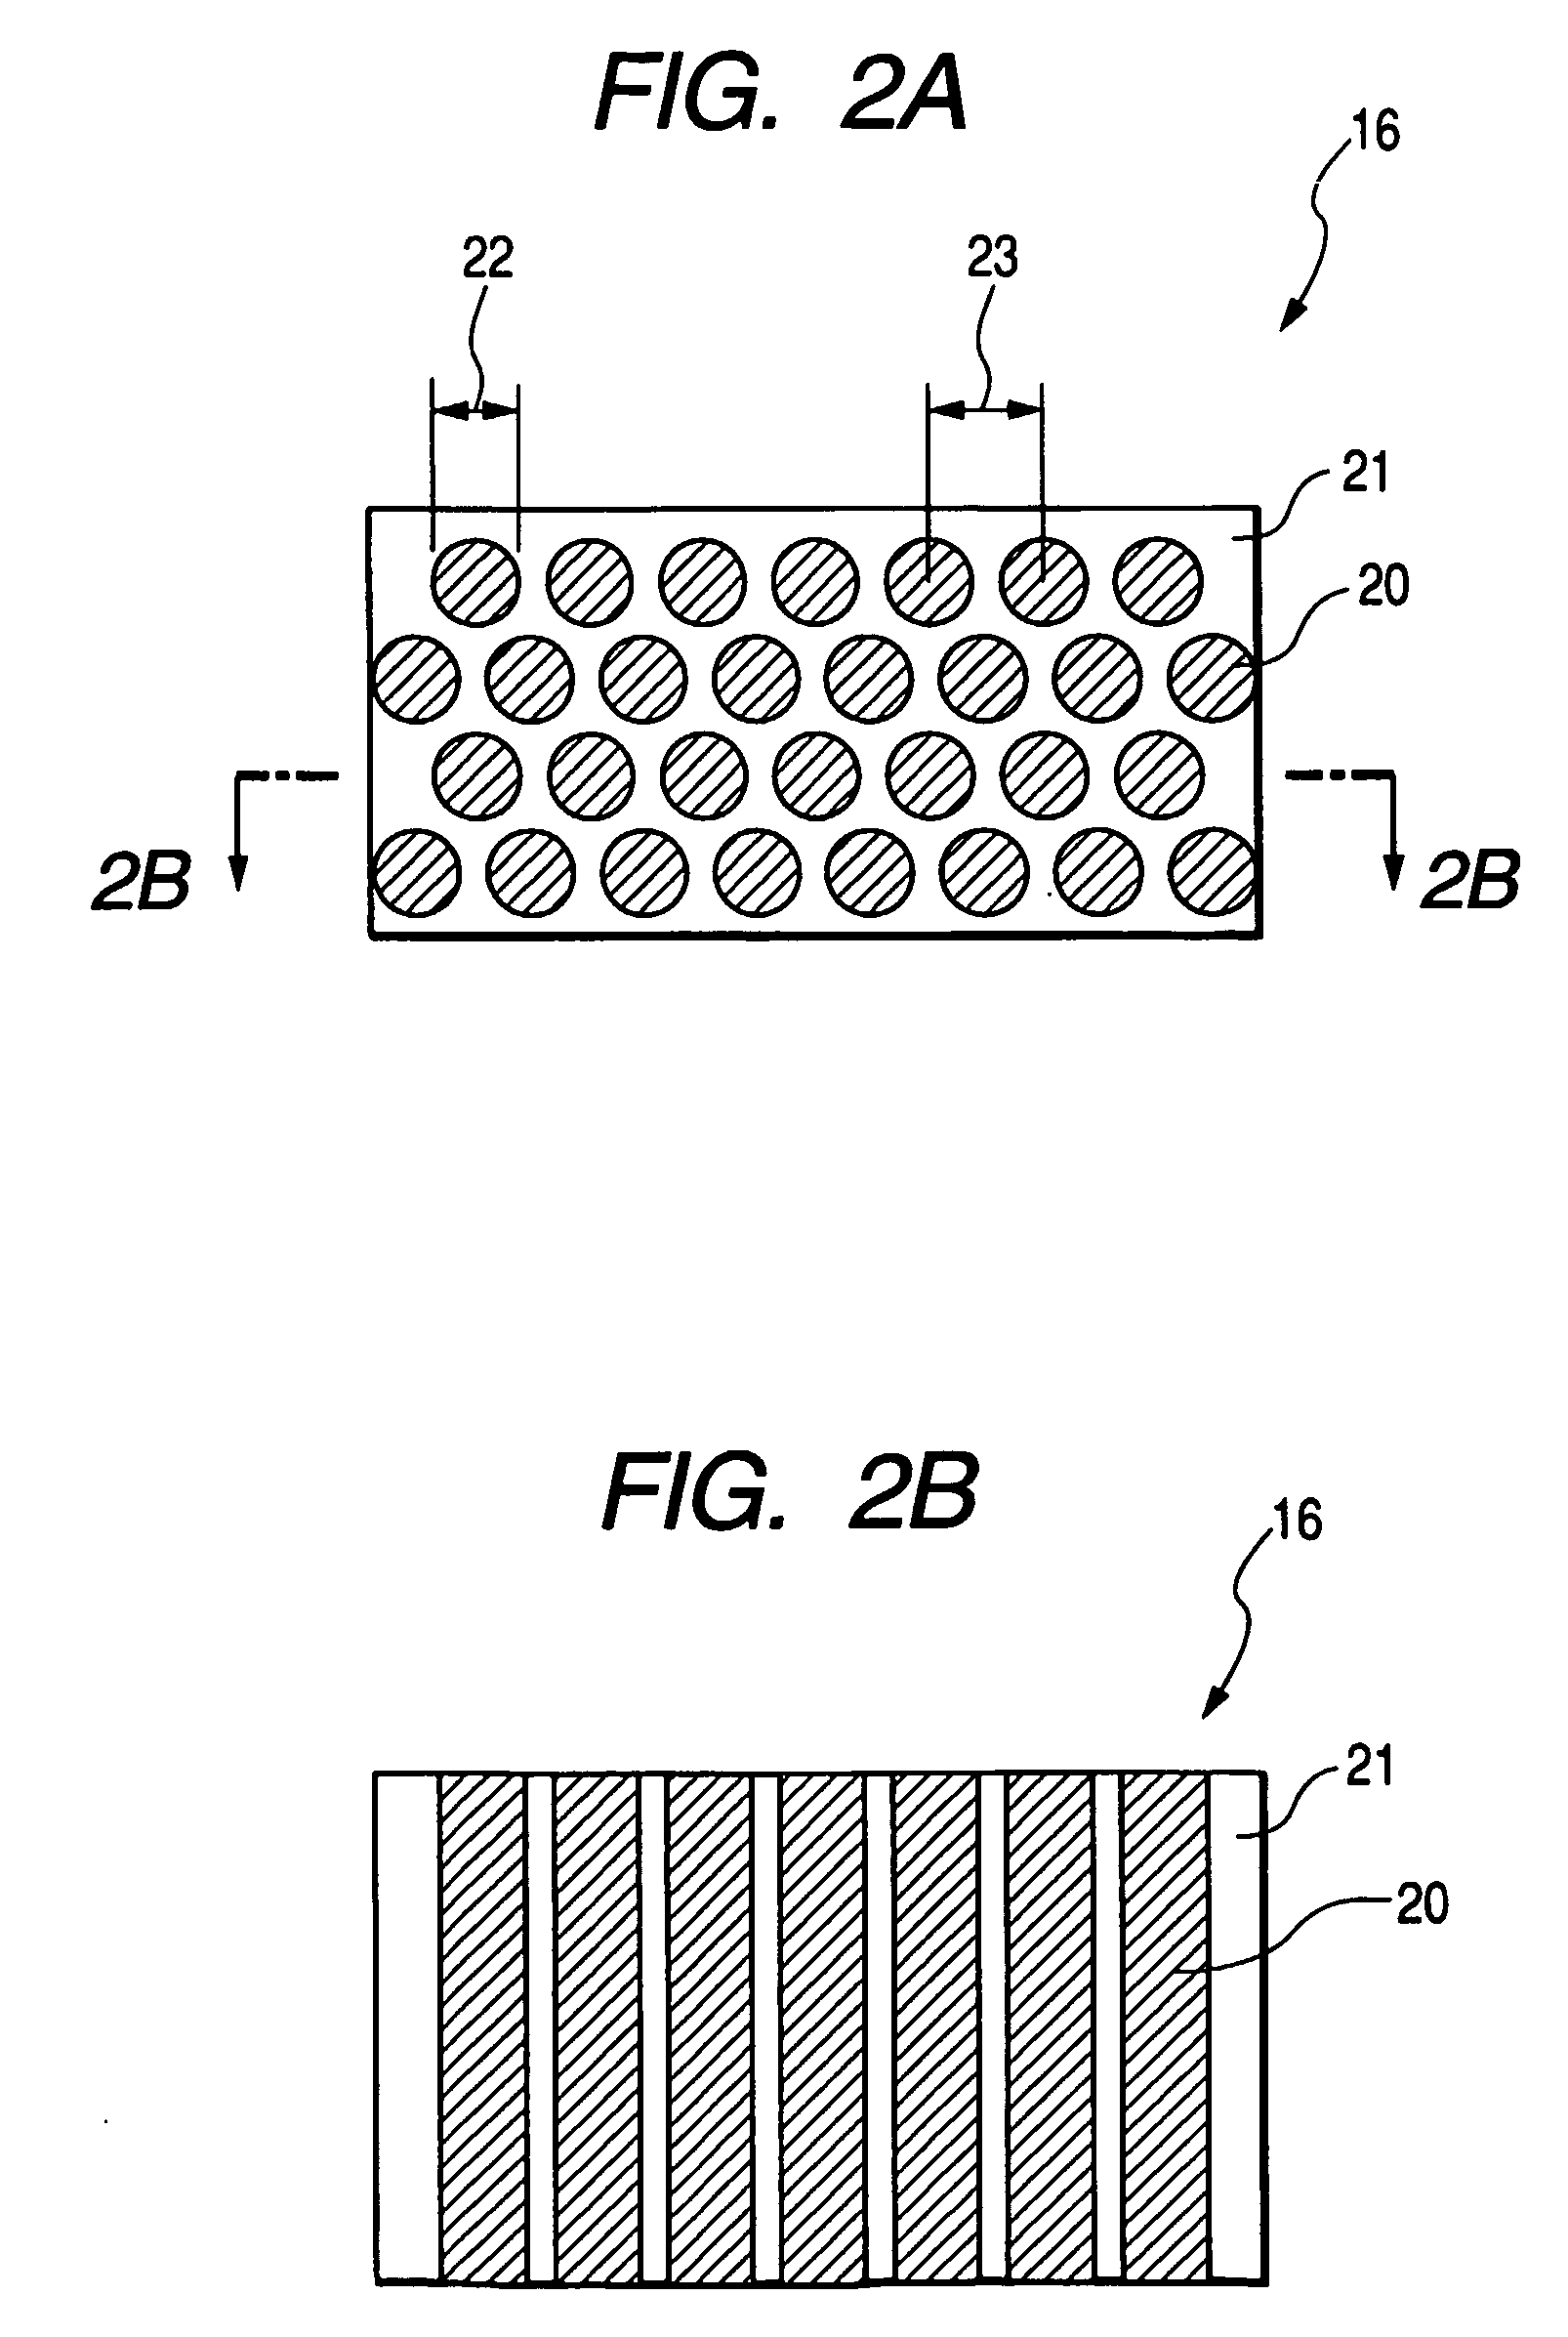 Plating solution, process for producing a structure with the plating solution, and apparatus employing the plating solution